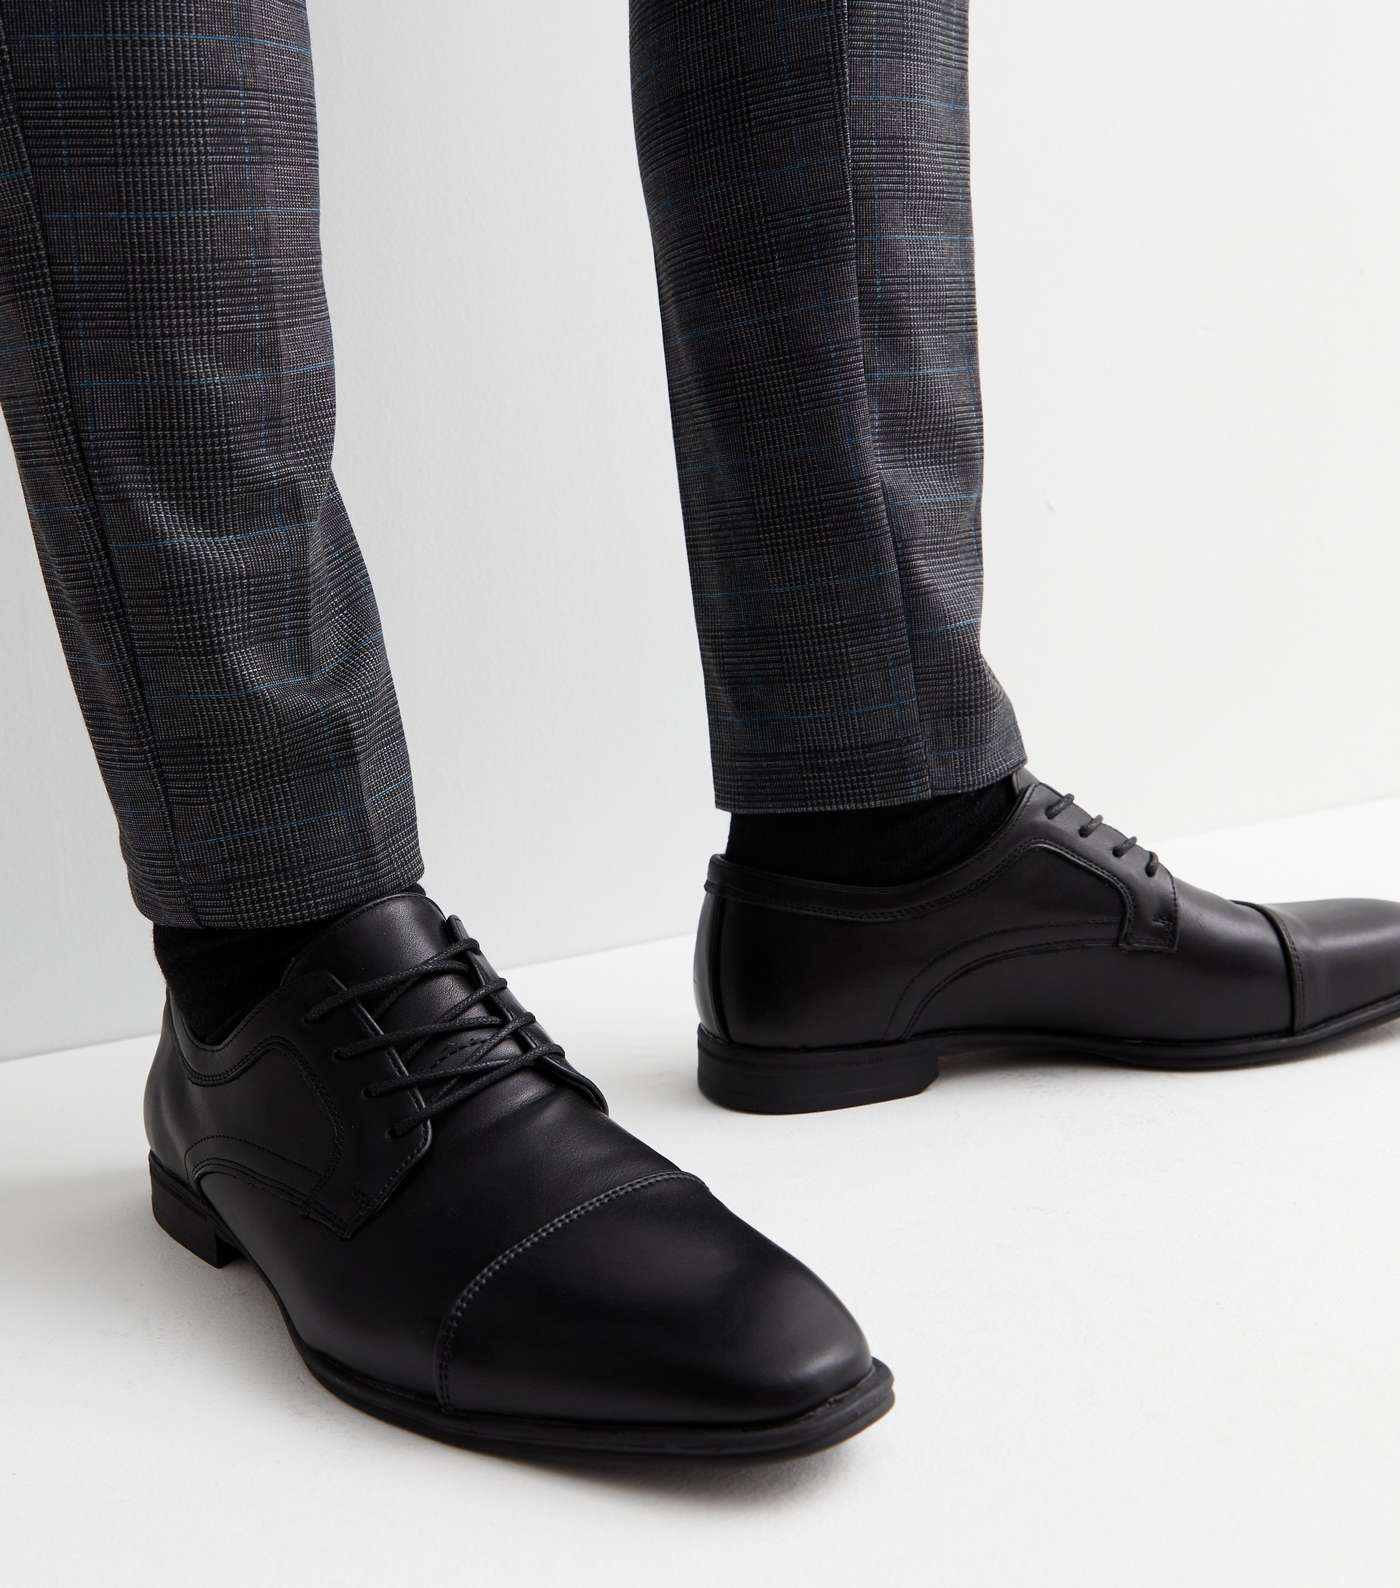 Black Leather-Look Oxford Shoes Image 2